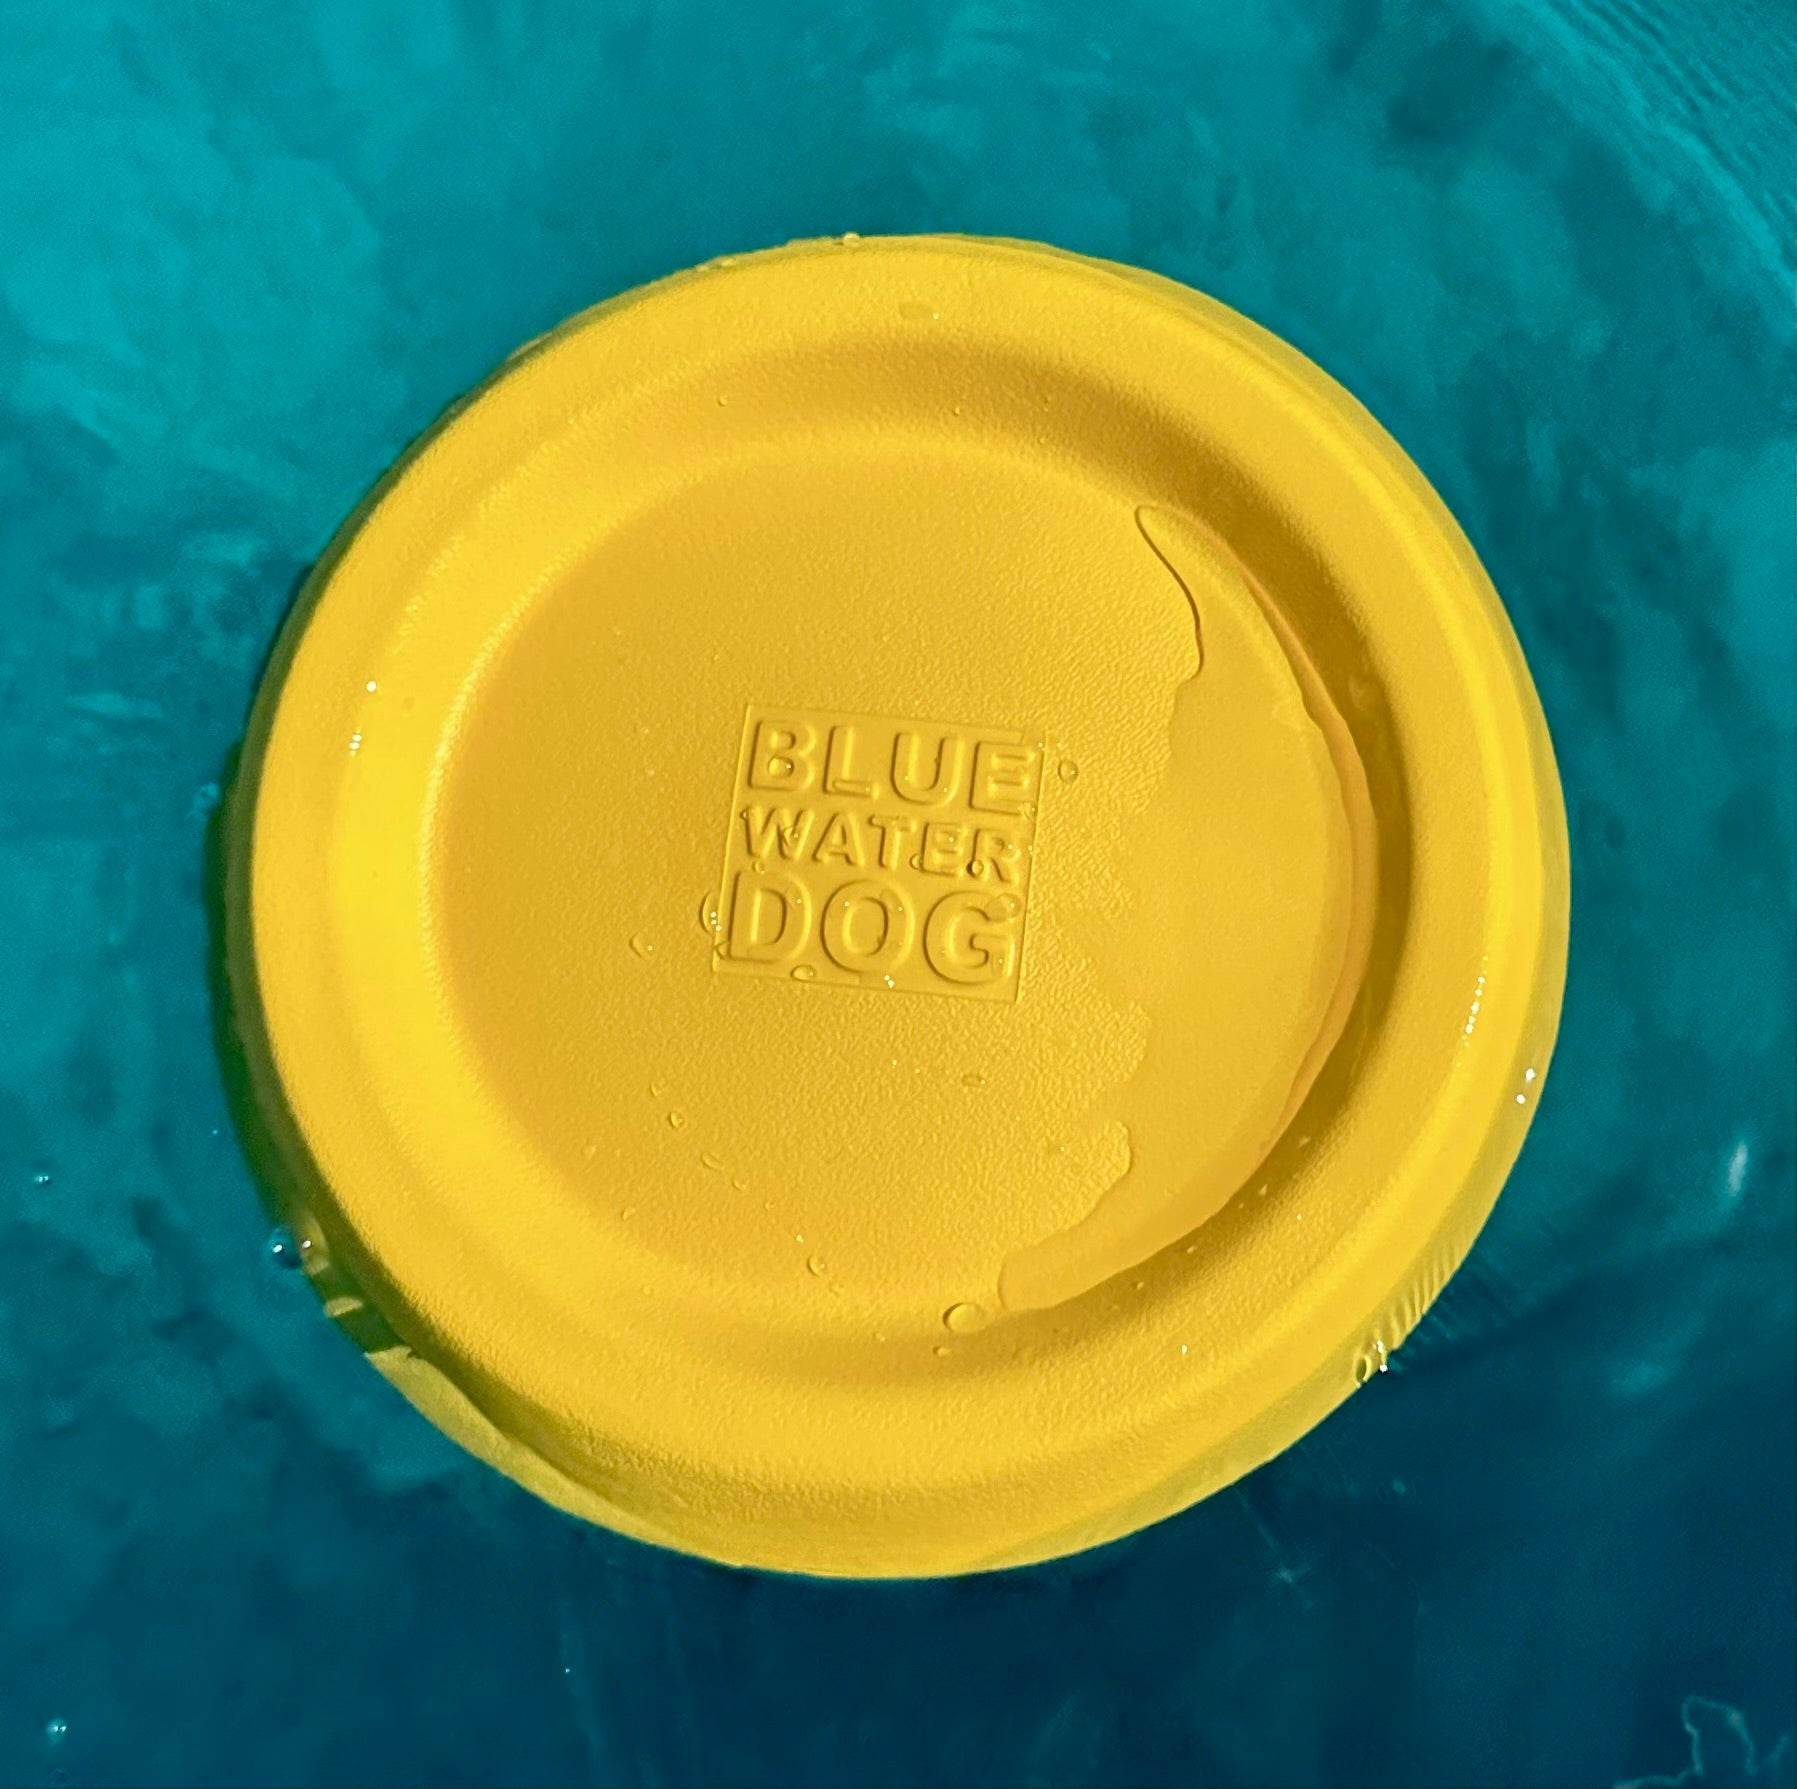 Yellow dog frisbee floating in blue water.